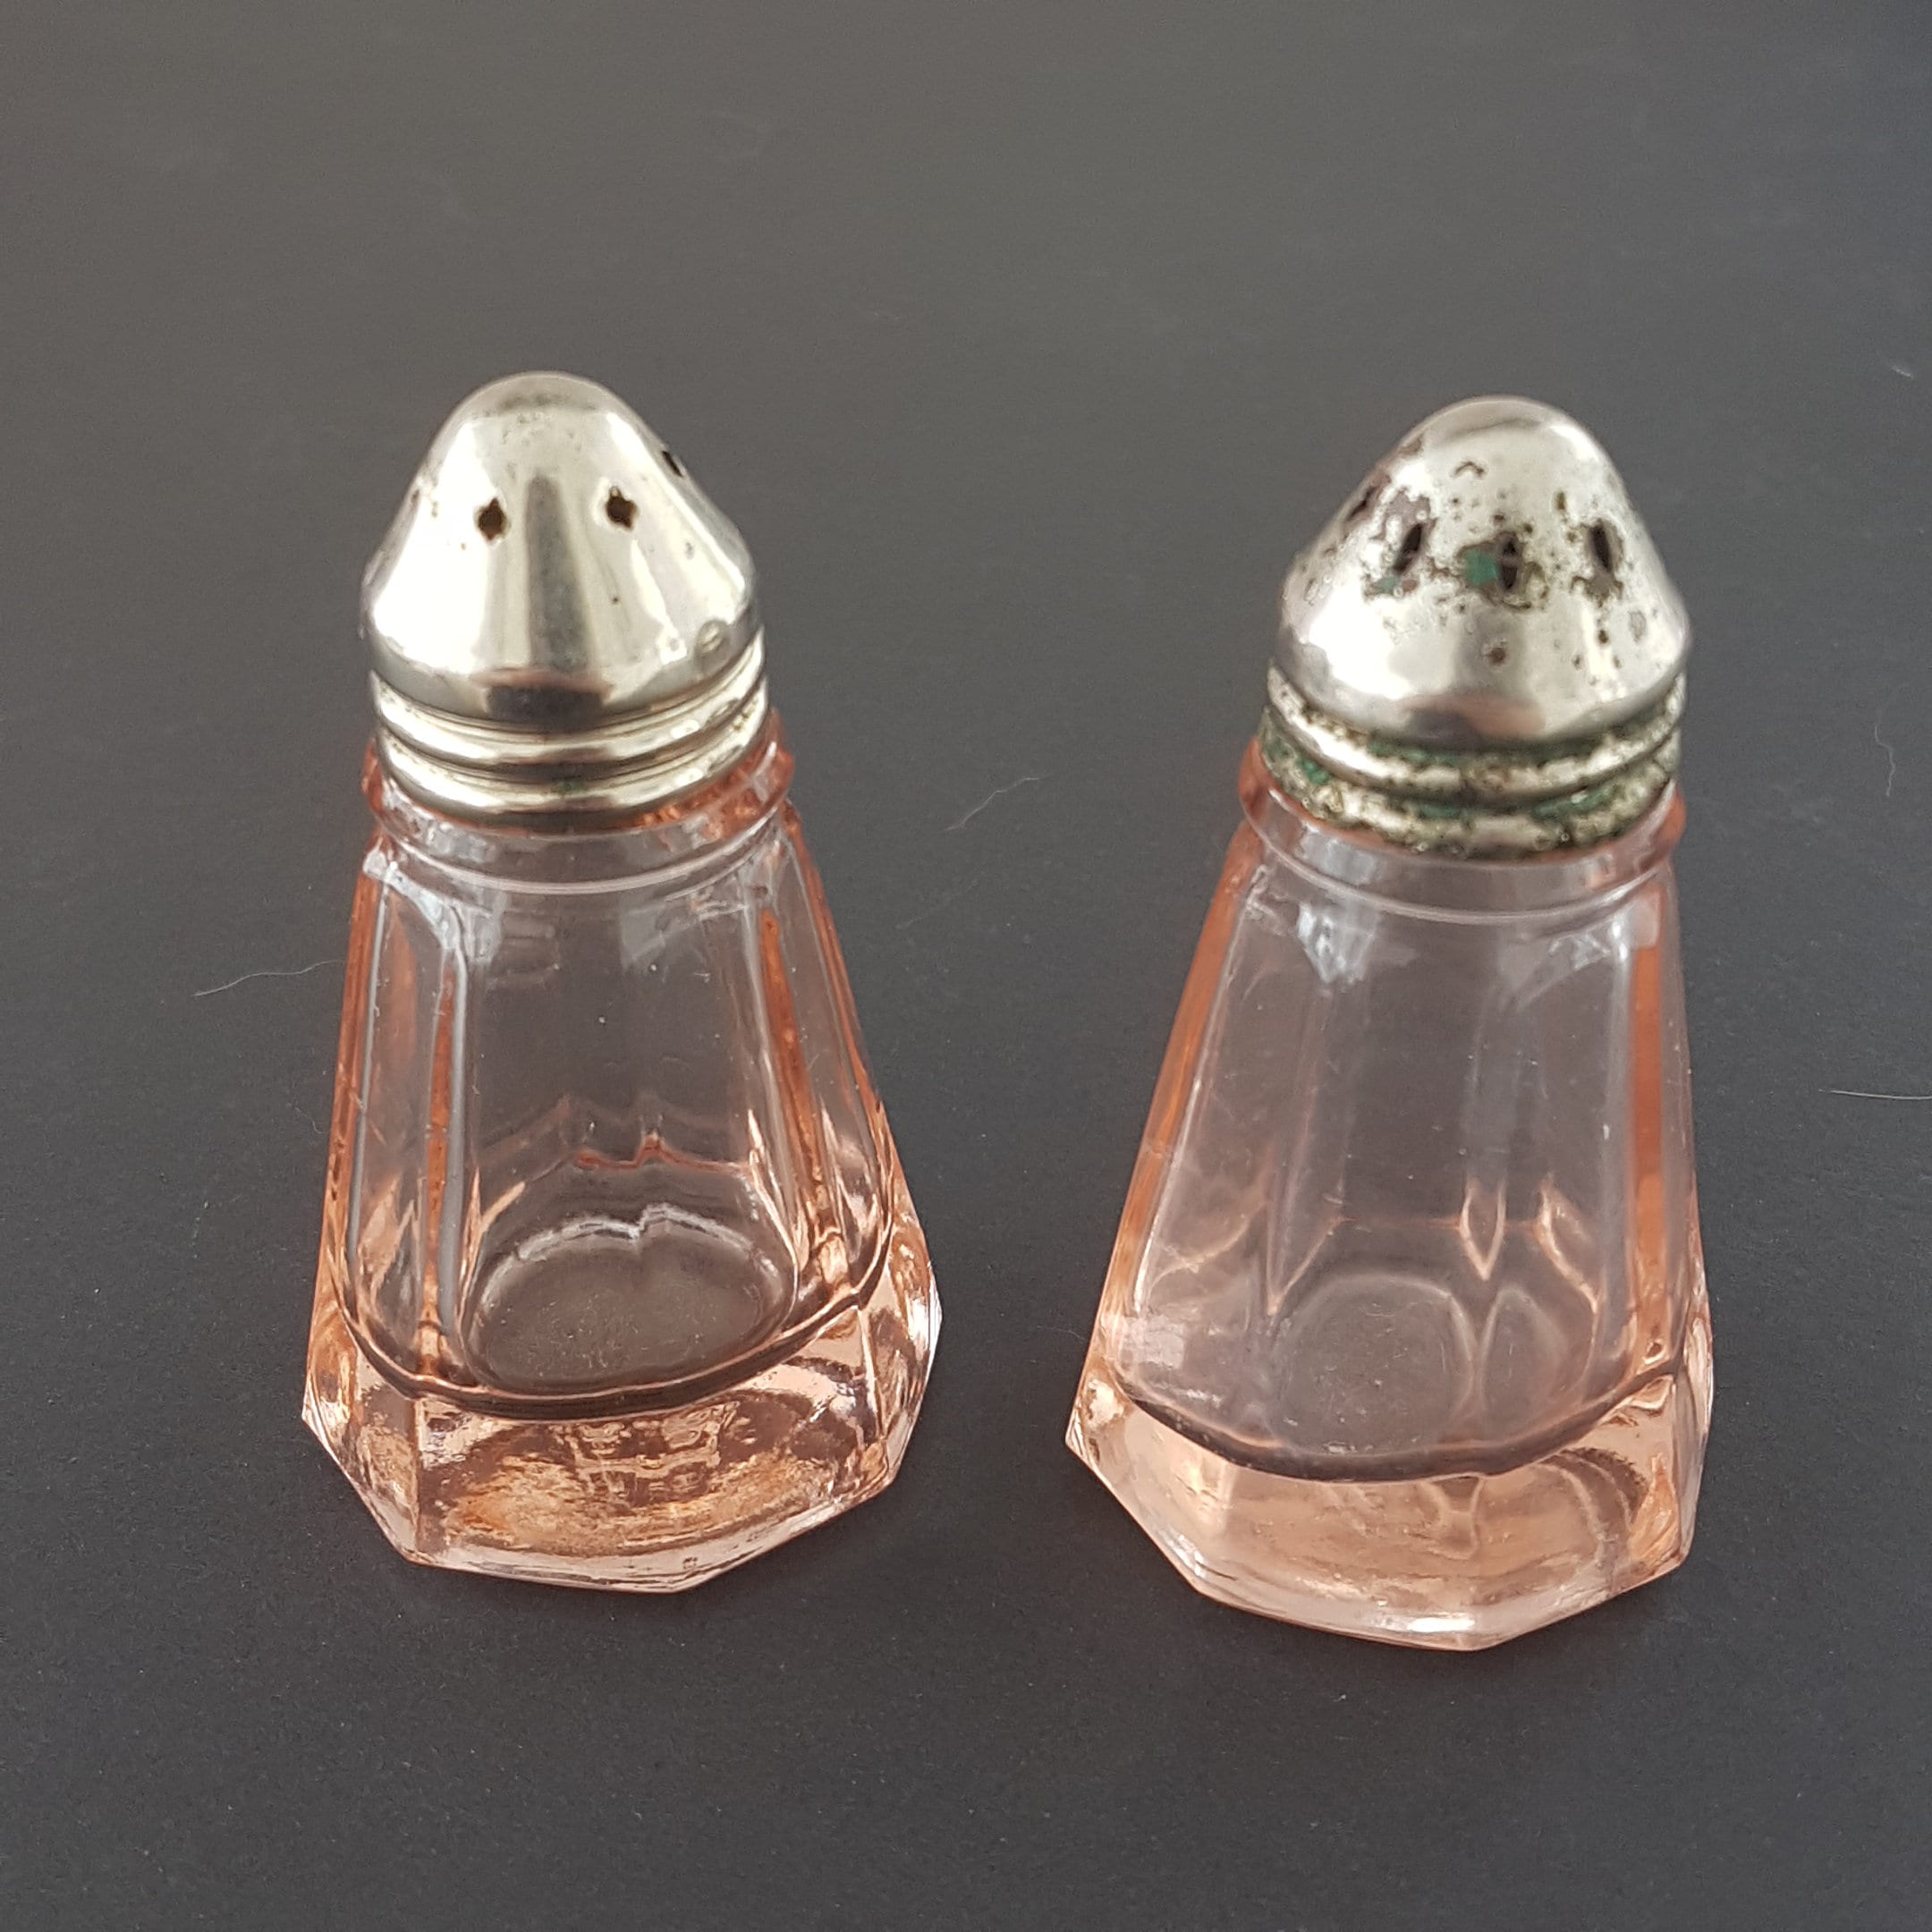 Vintage Deco Salt and Pepper Shakers RARE 1930s 1940s Push 